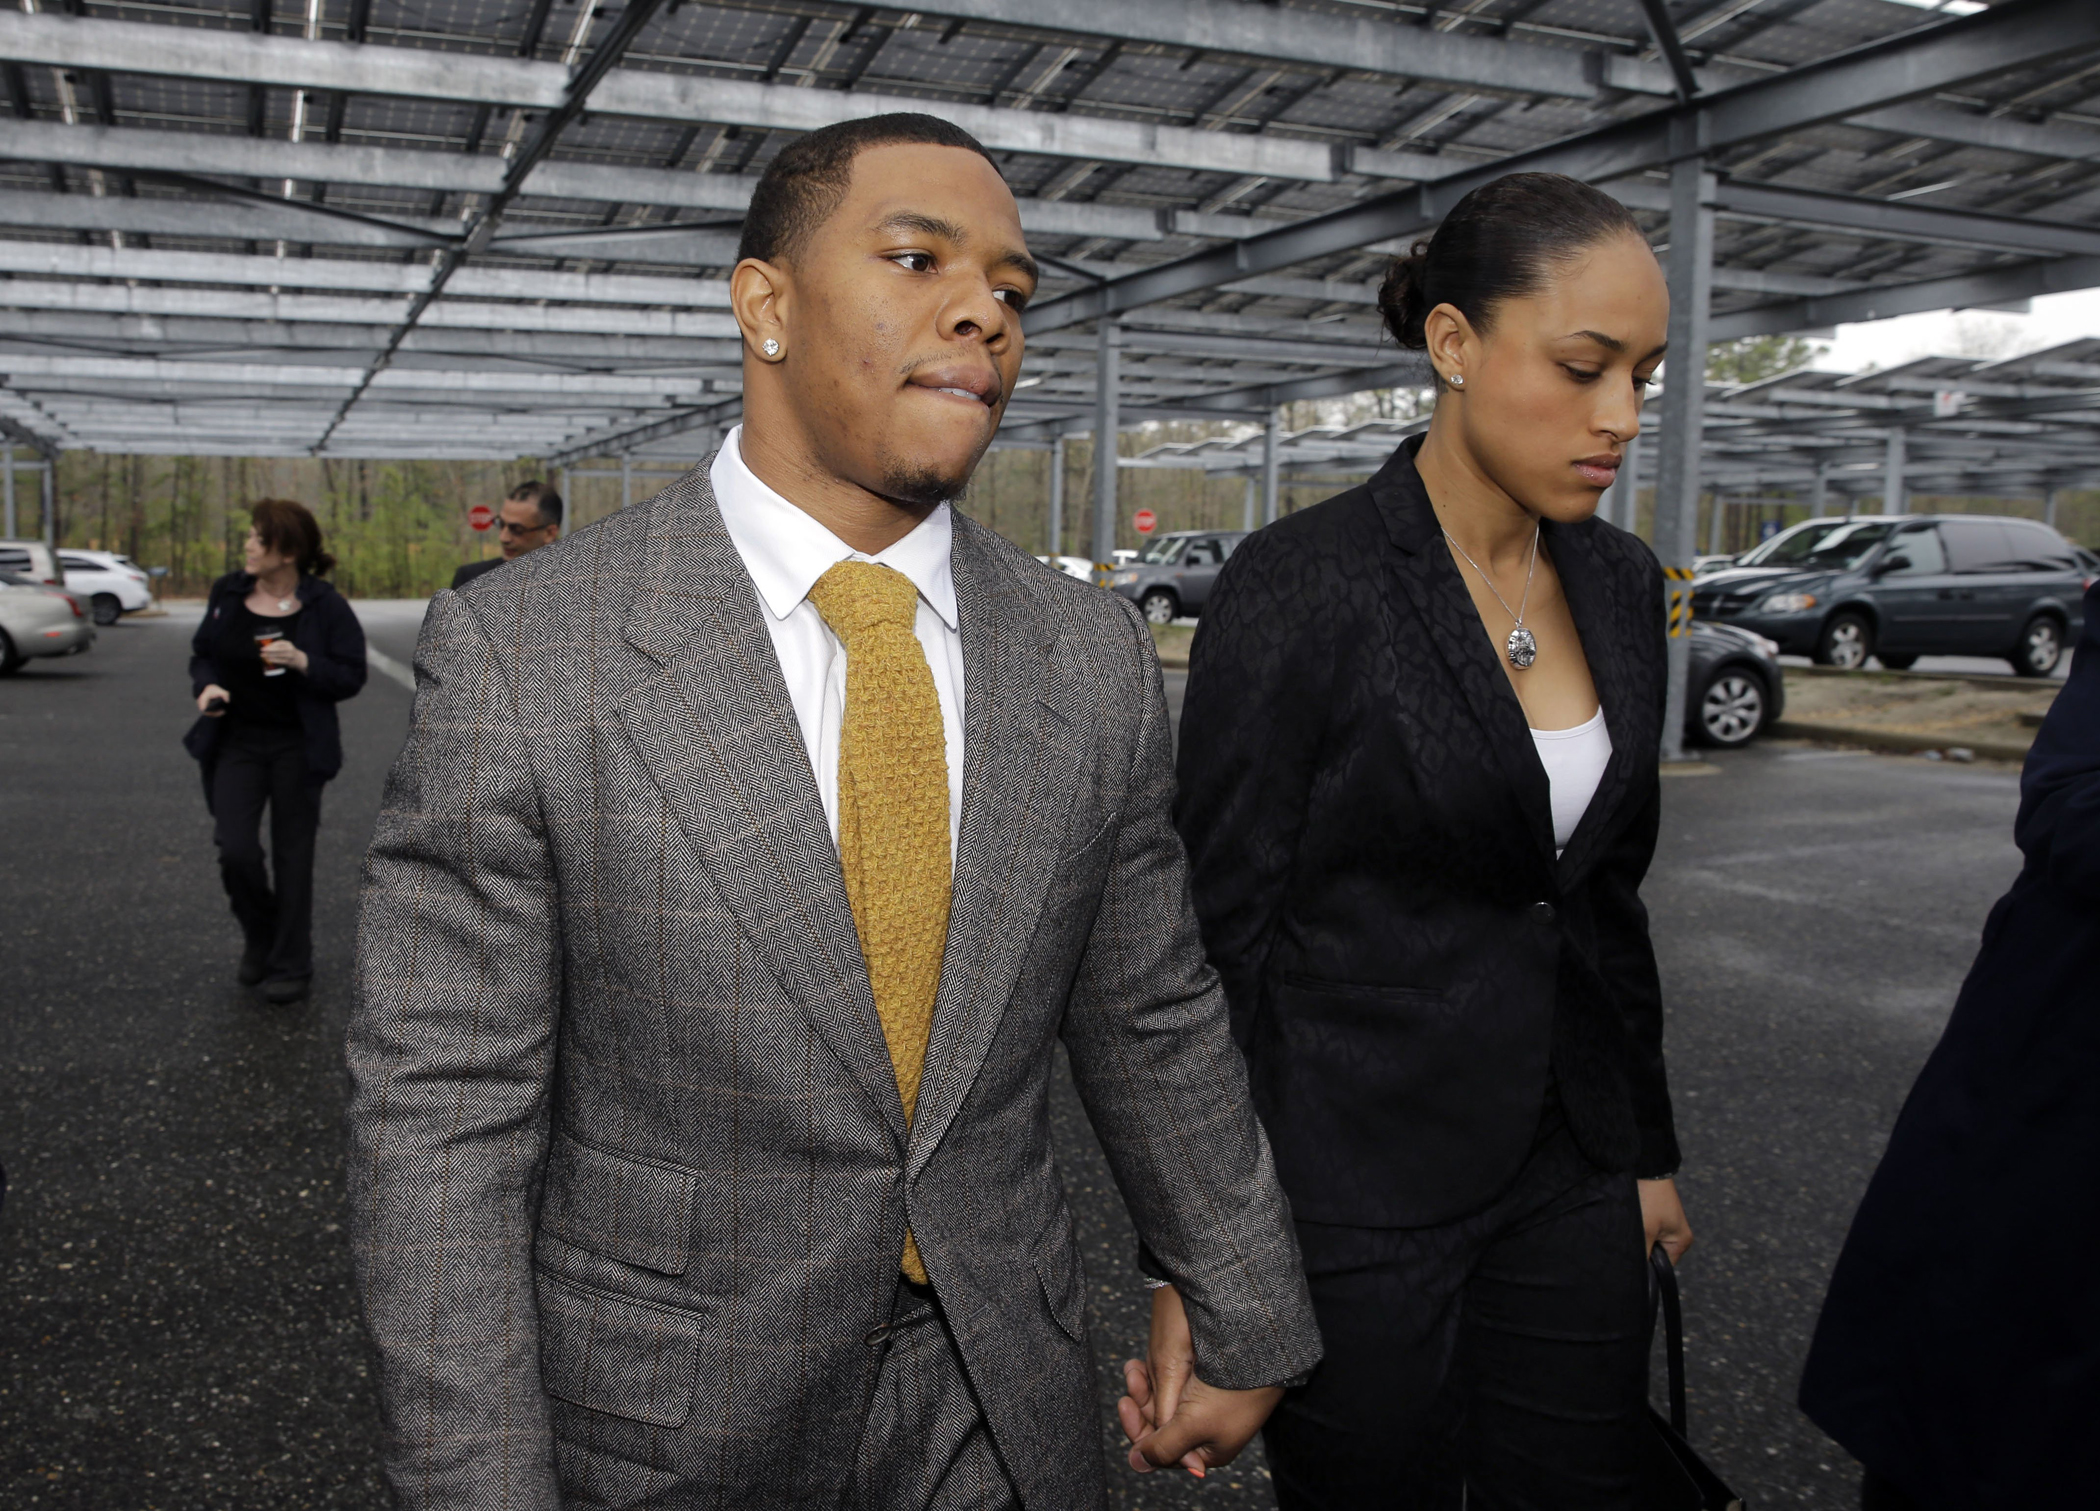 Baltimore Ravens football player Ray Rice holds hands with his wife, Janay Palmer, as they arrive at Atlantic County Criminal Courthouse in Mays Landing, N.J., in May 2014.